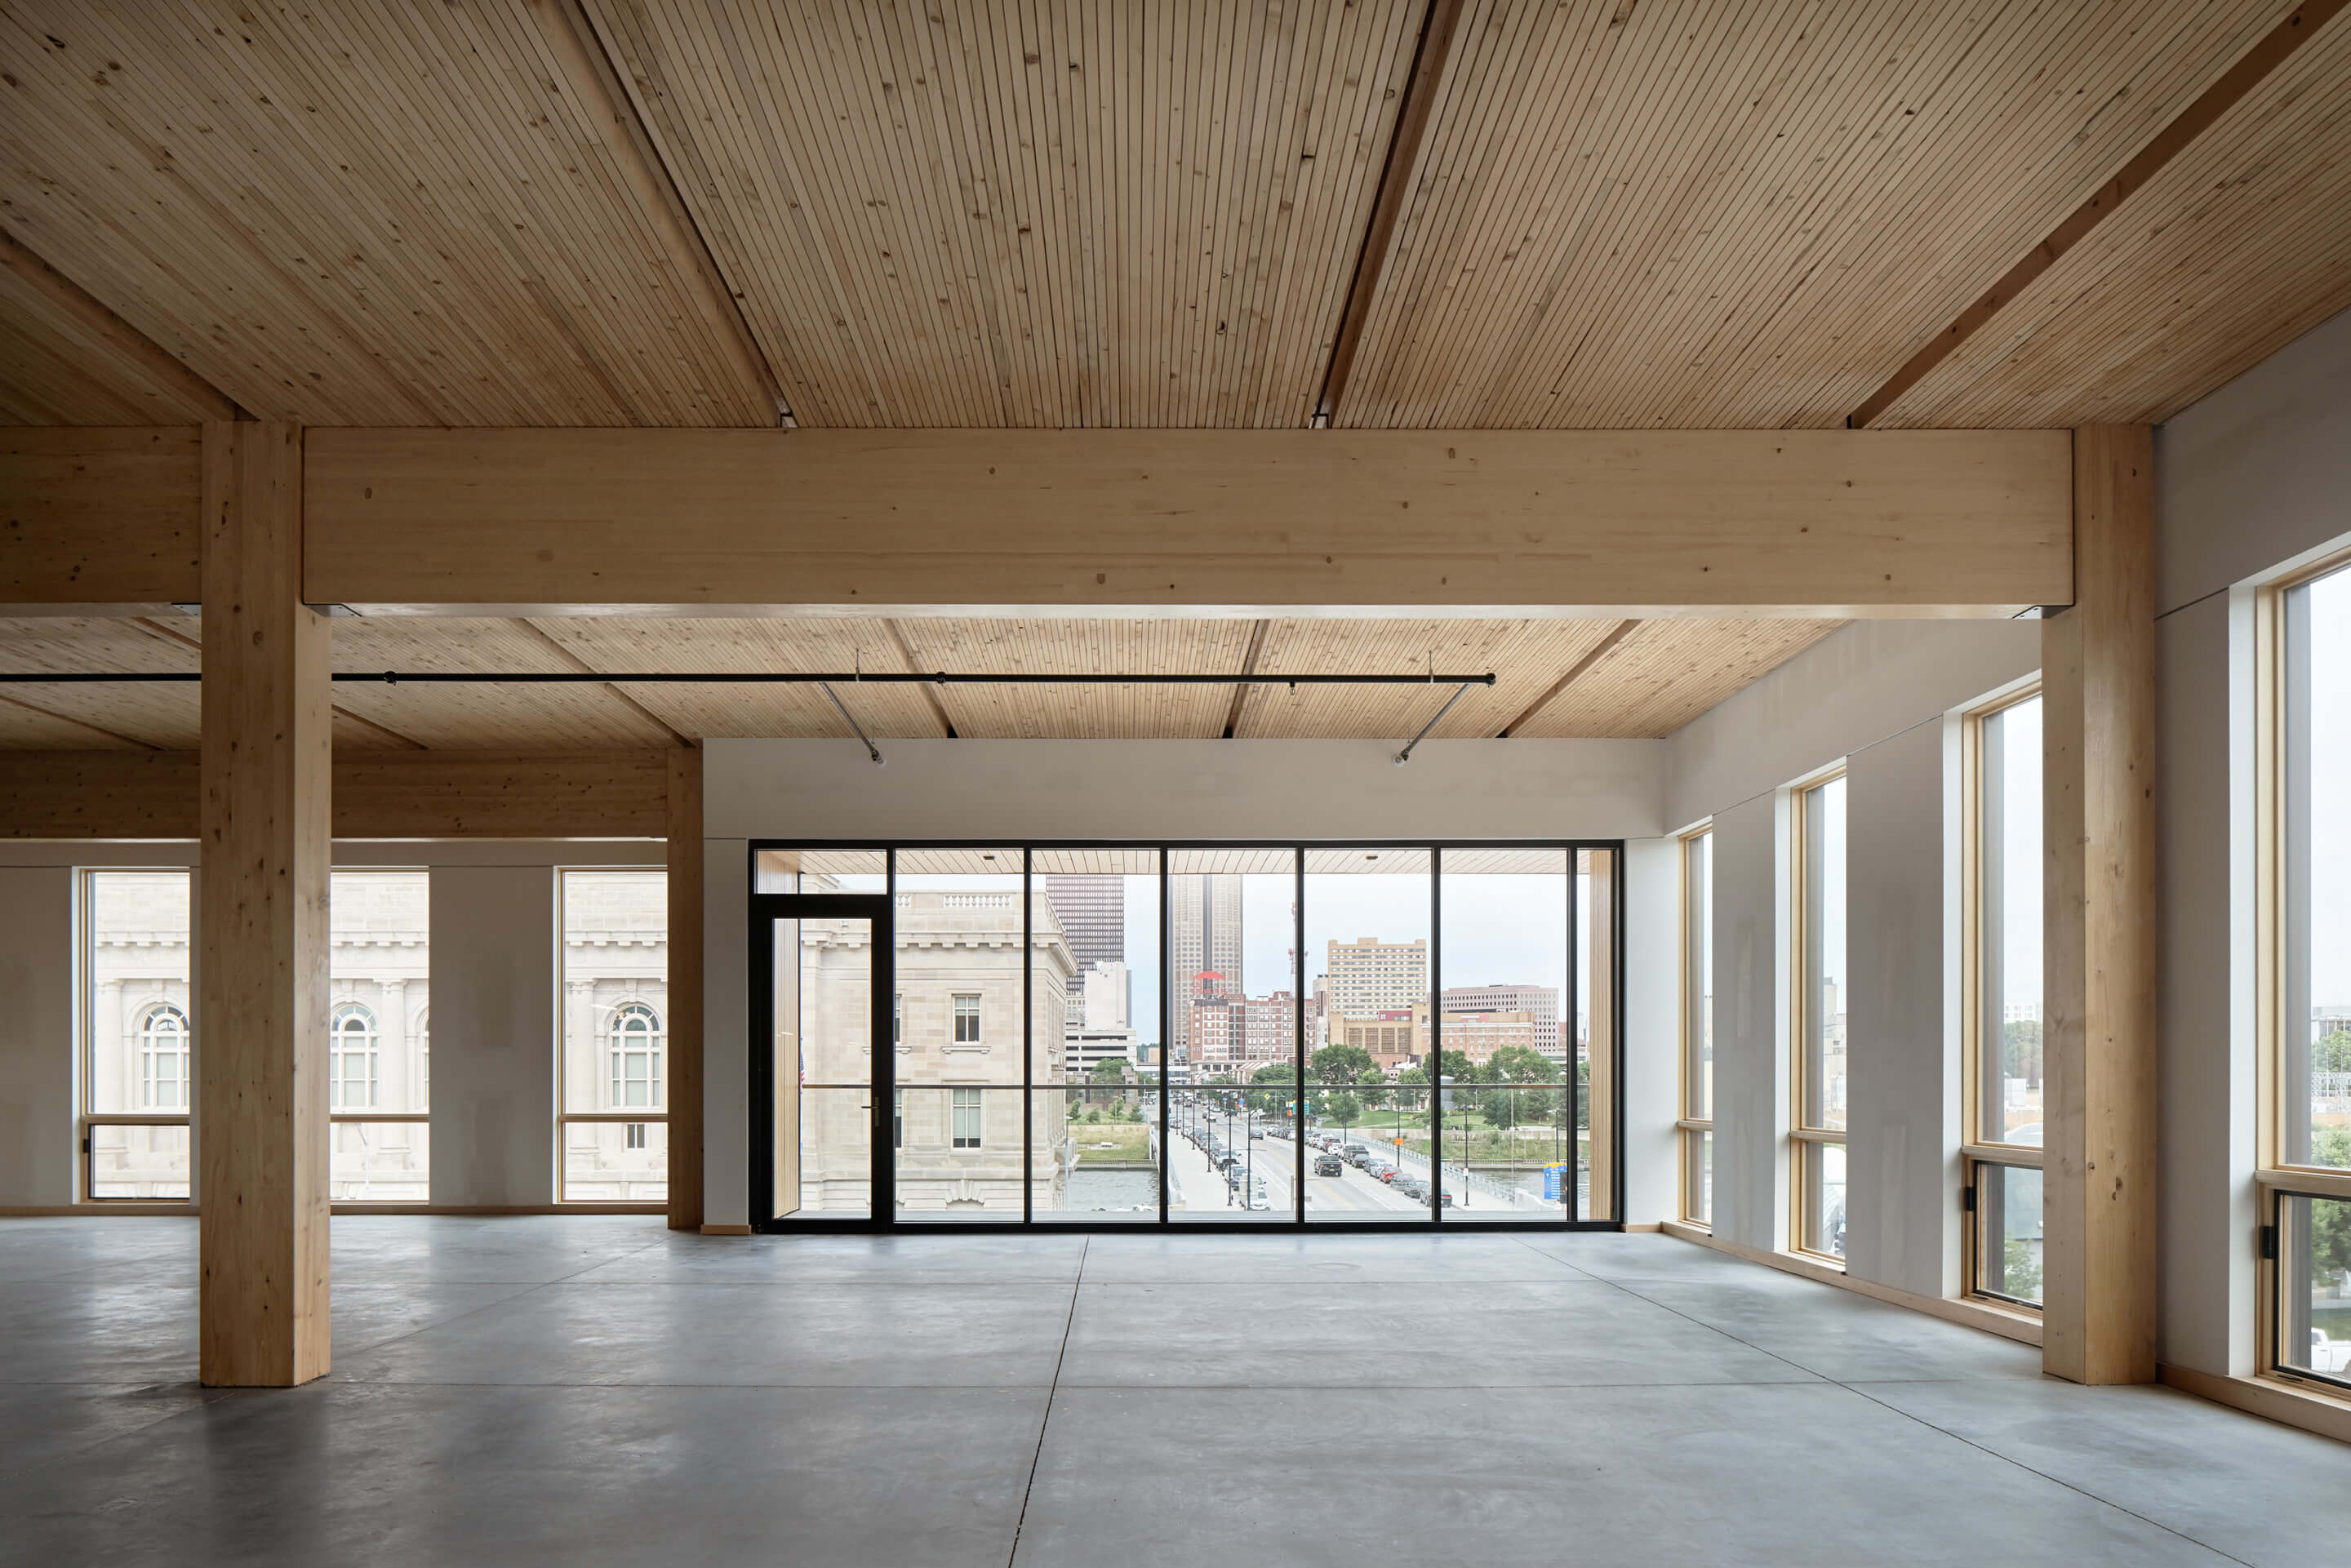 Interior of a striated timber office space